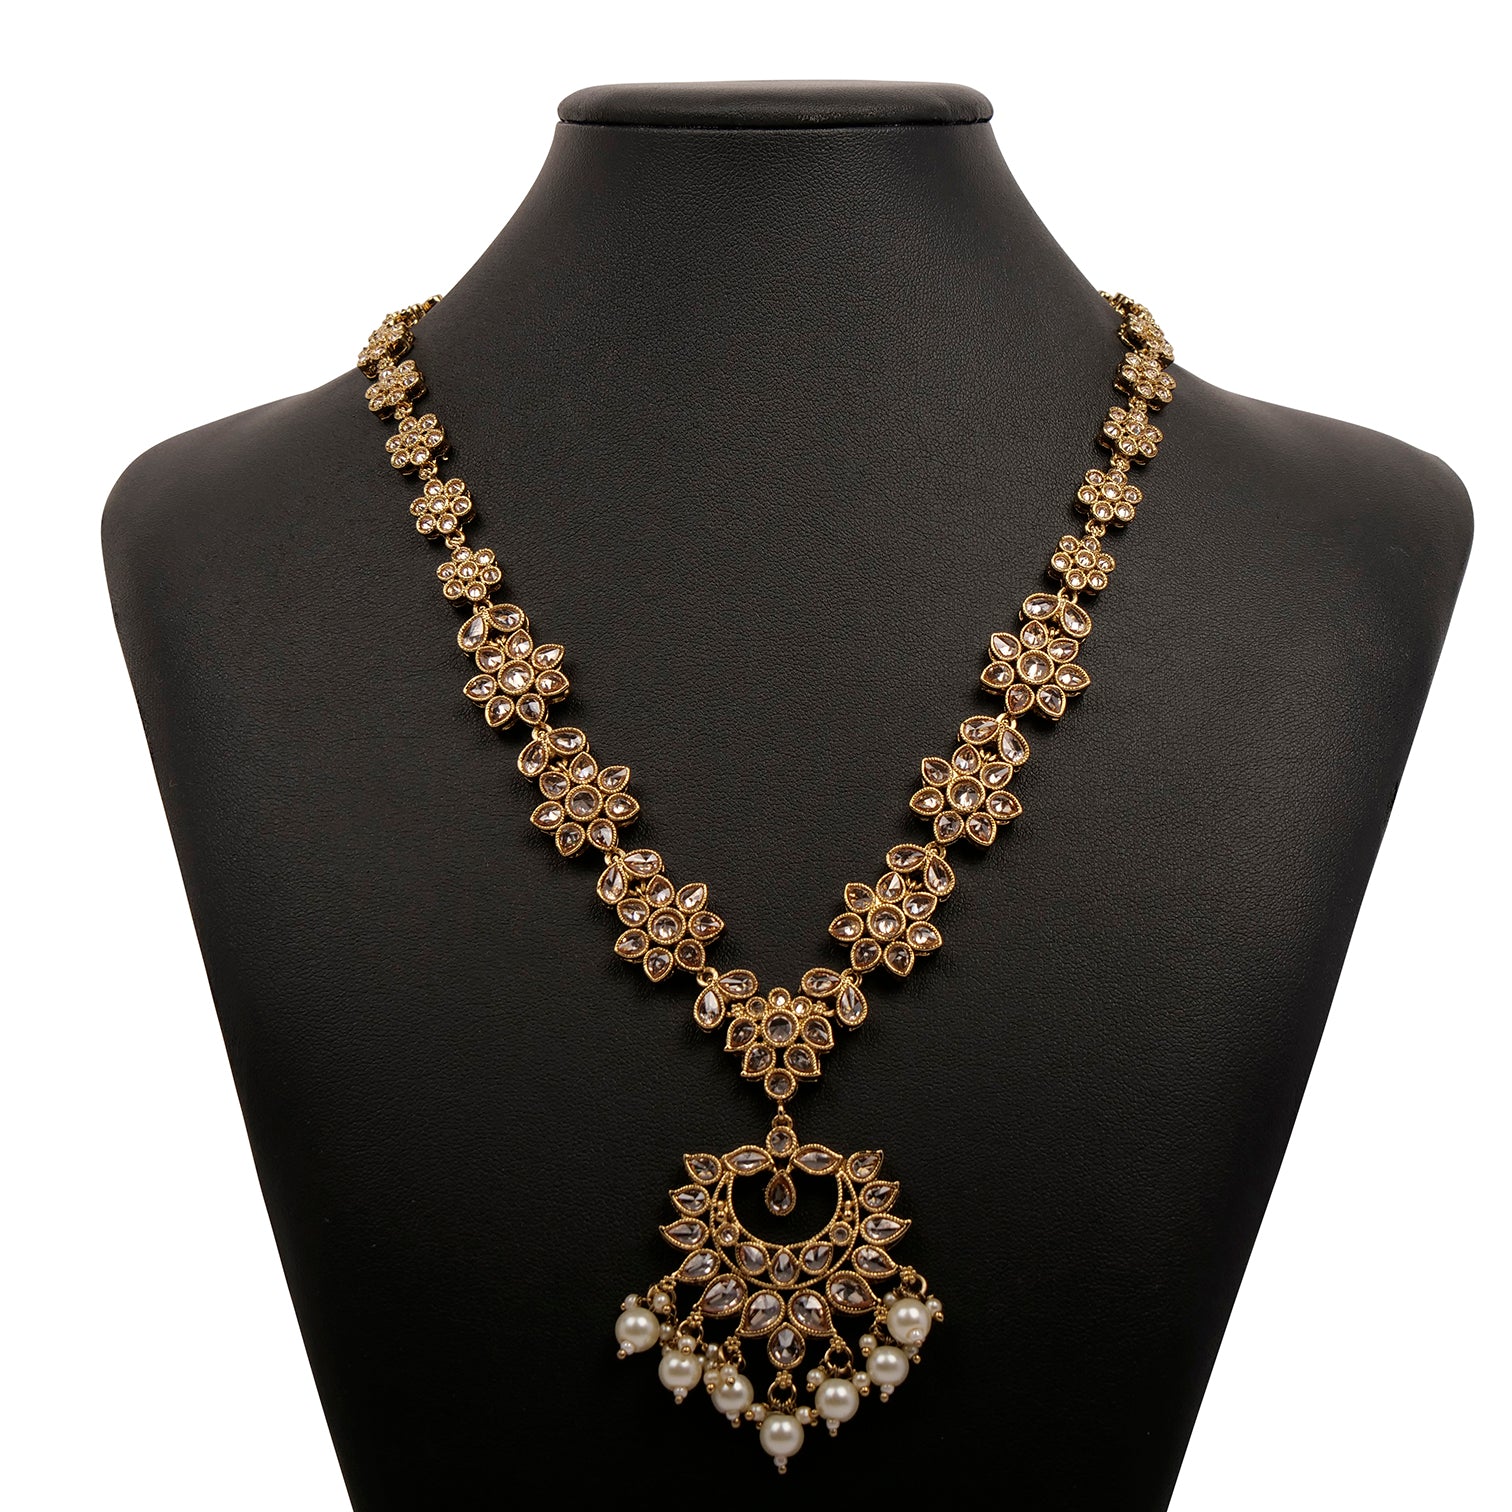 Niara Long Necklace in Pearl and Antique Gold